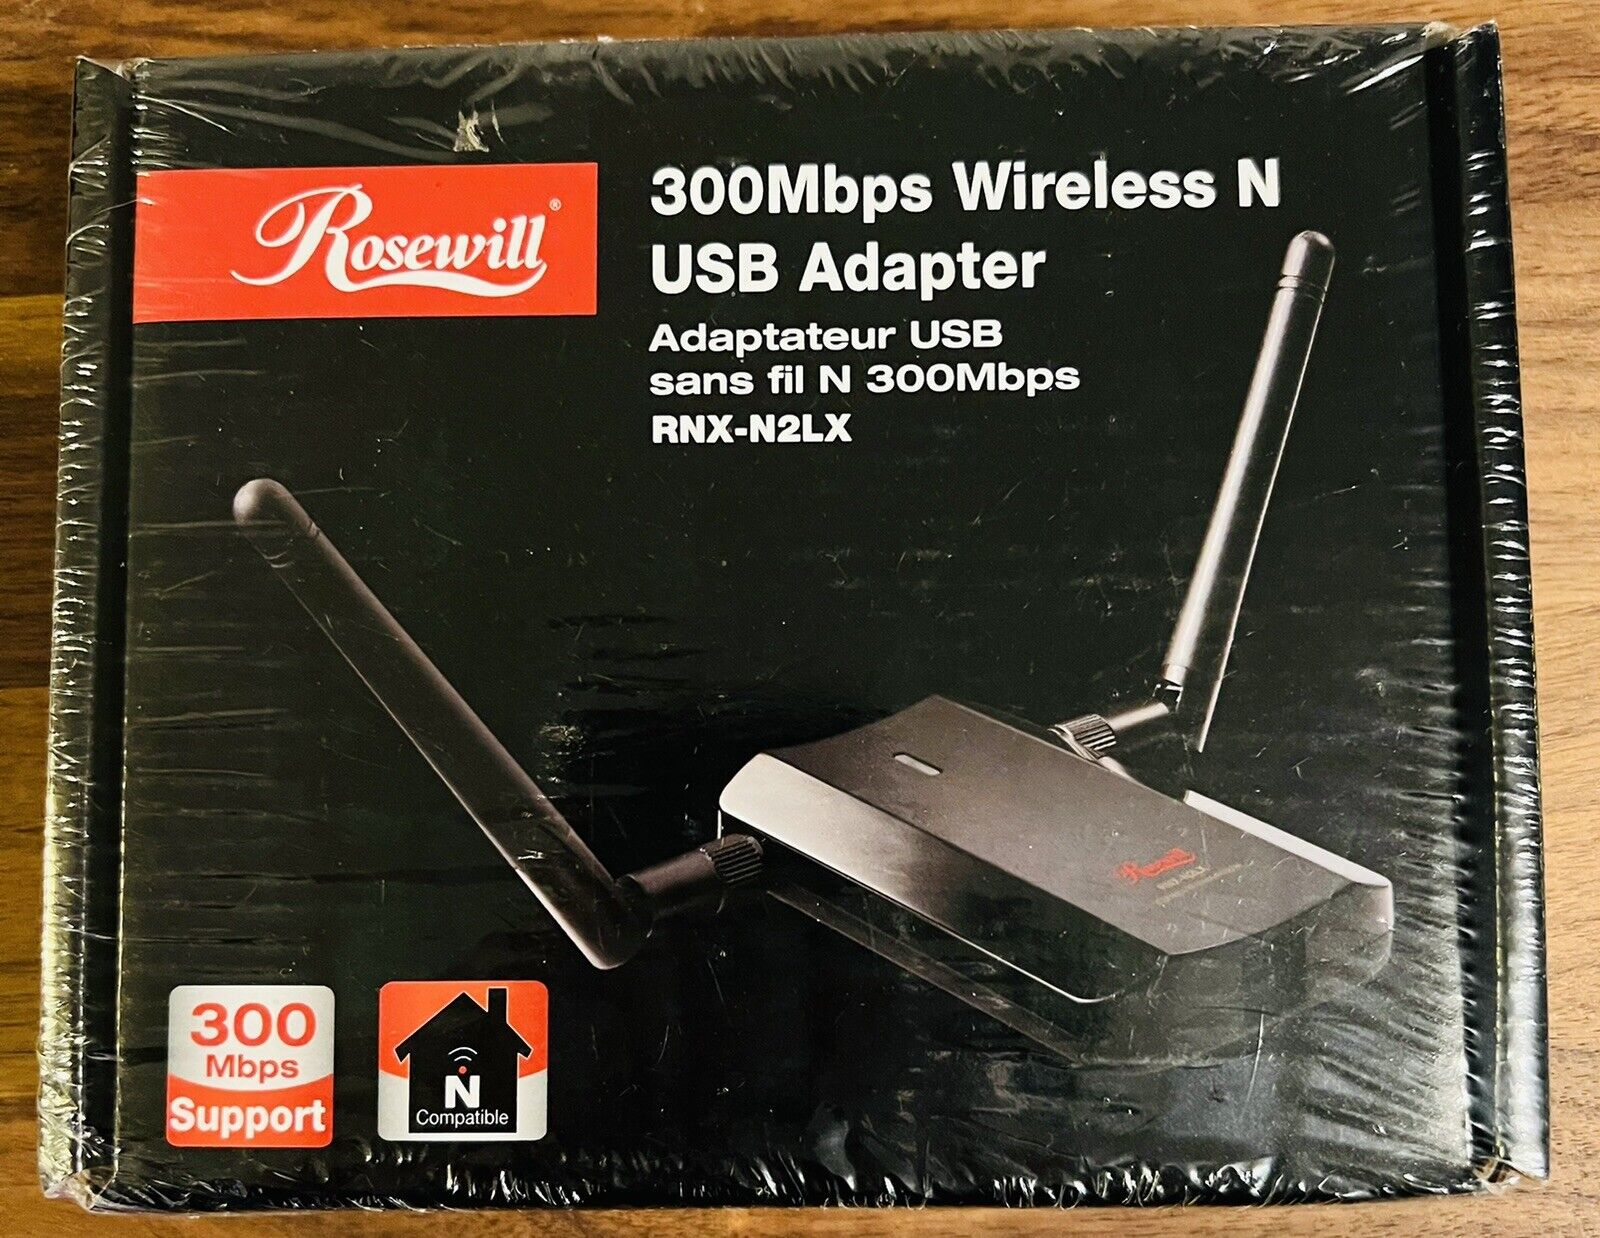 Brand New Sealed Rosewill RNX-N2LX Wireless N 300Mbps USB Adapter.